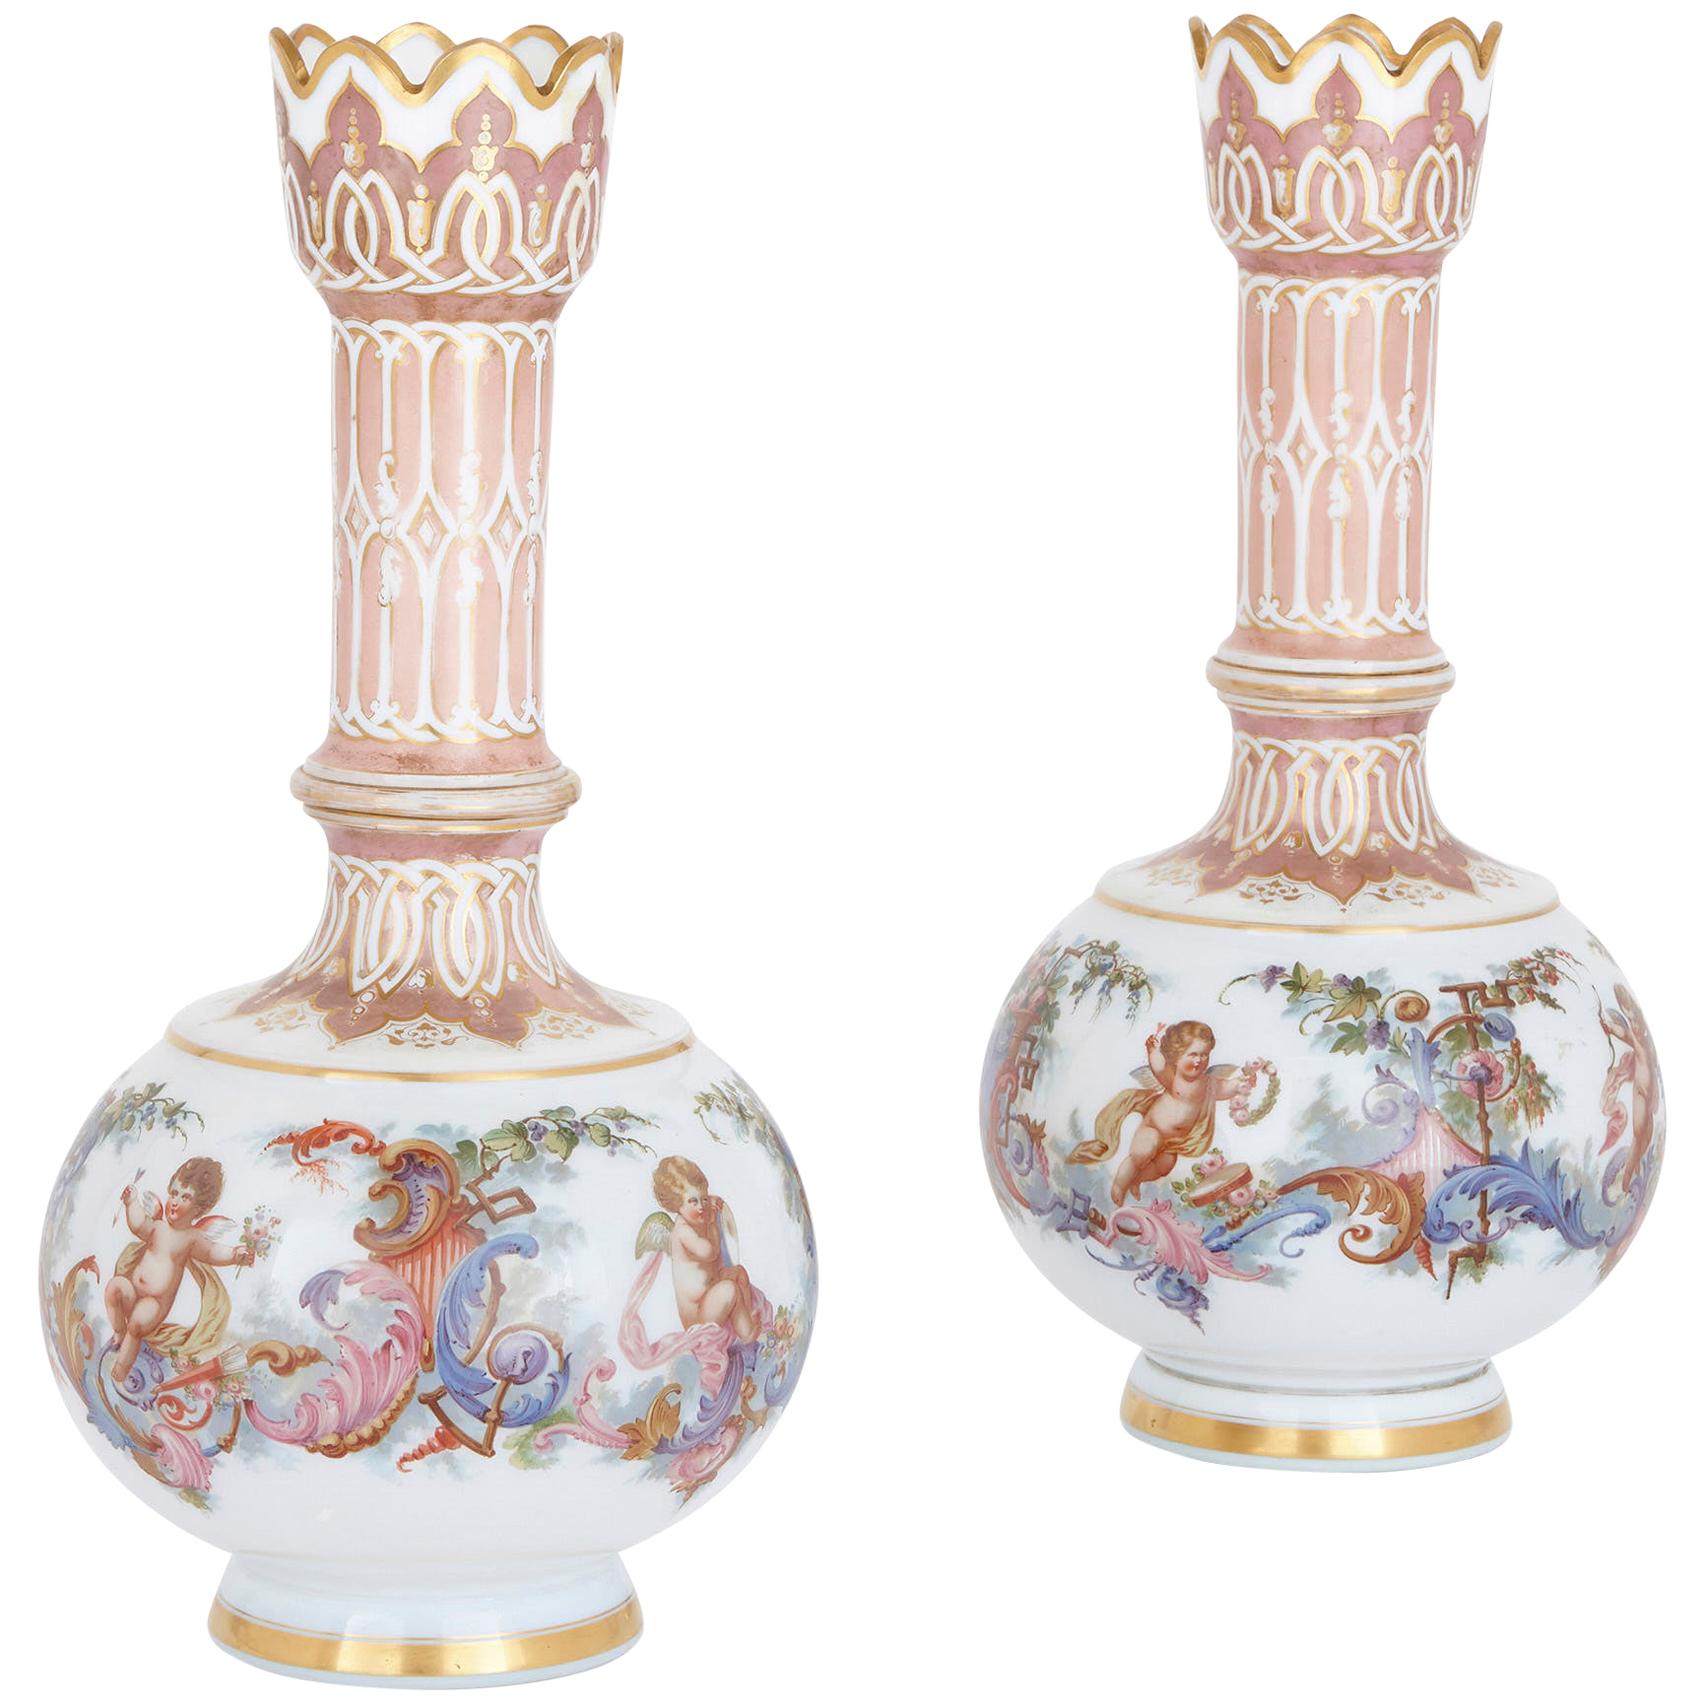 Two Bohemian Opaline Glass Vases with Painted Cherub Scenes